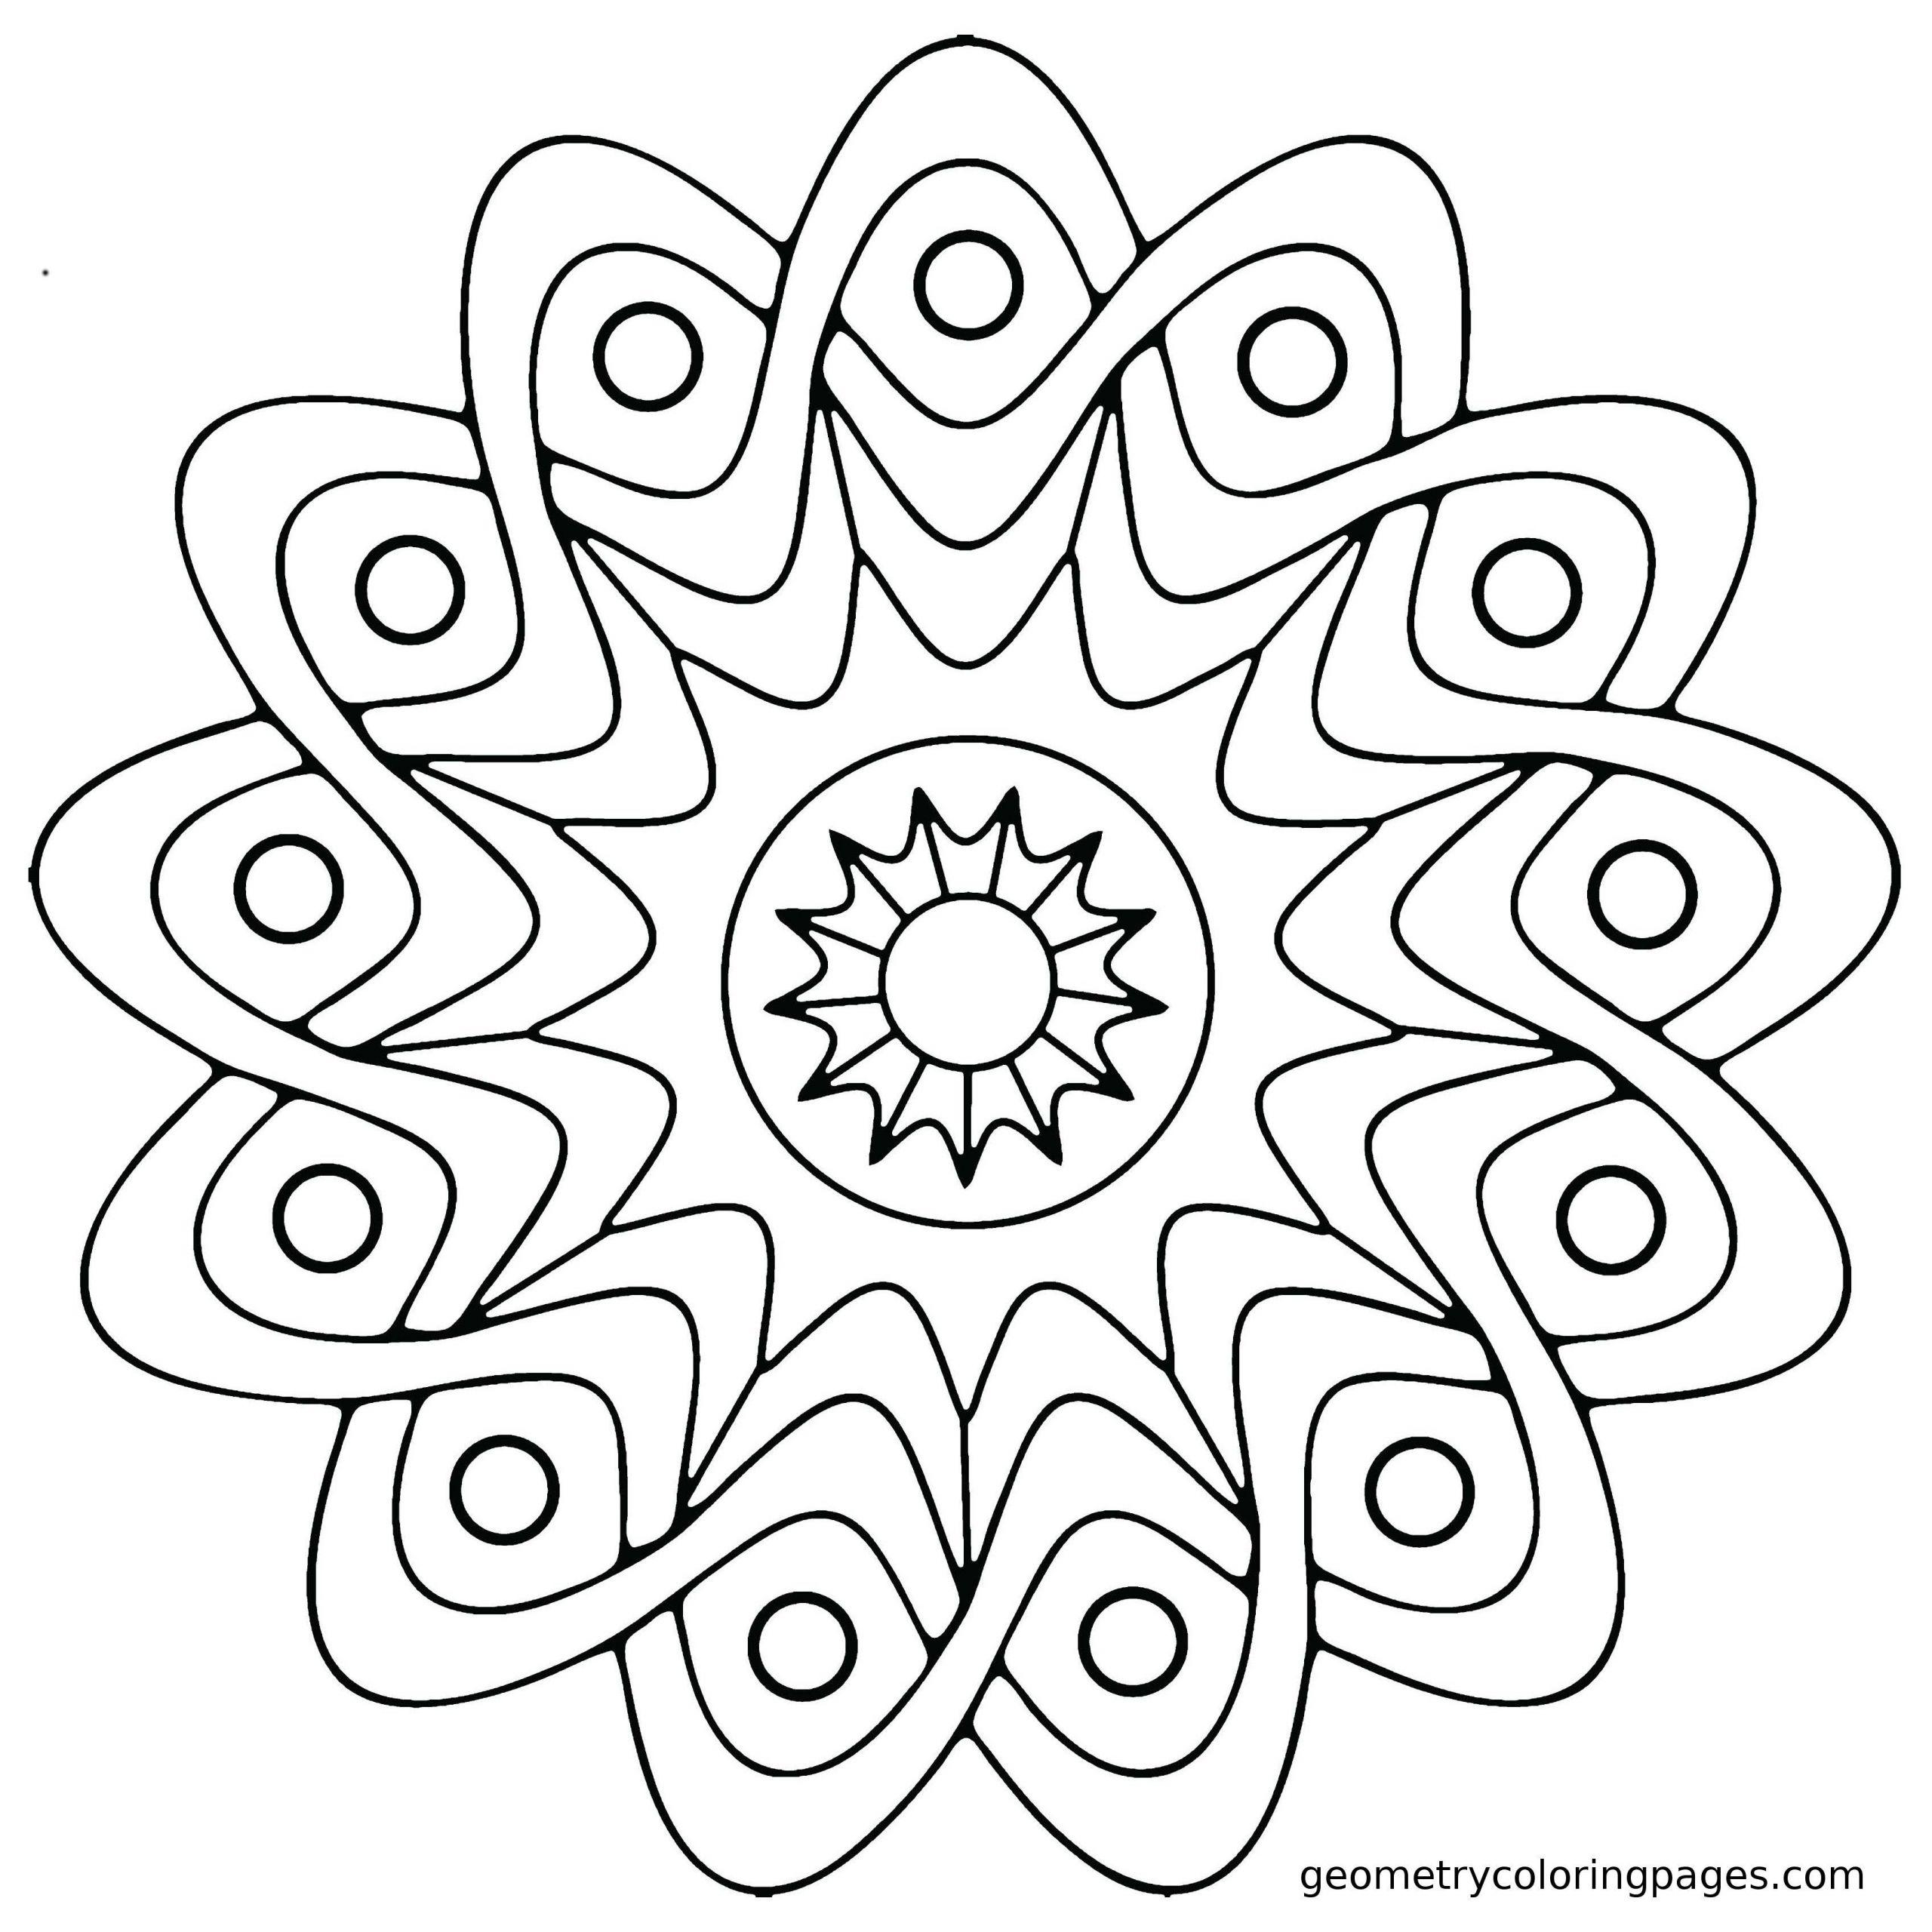 Simple Coloring Pages For Adults
 Mandala Coloring Pages Easy Mandala Coloring Pages